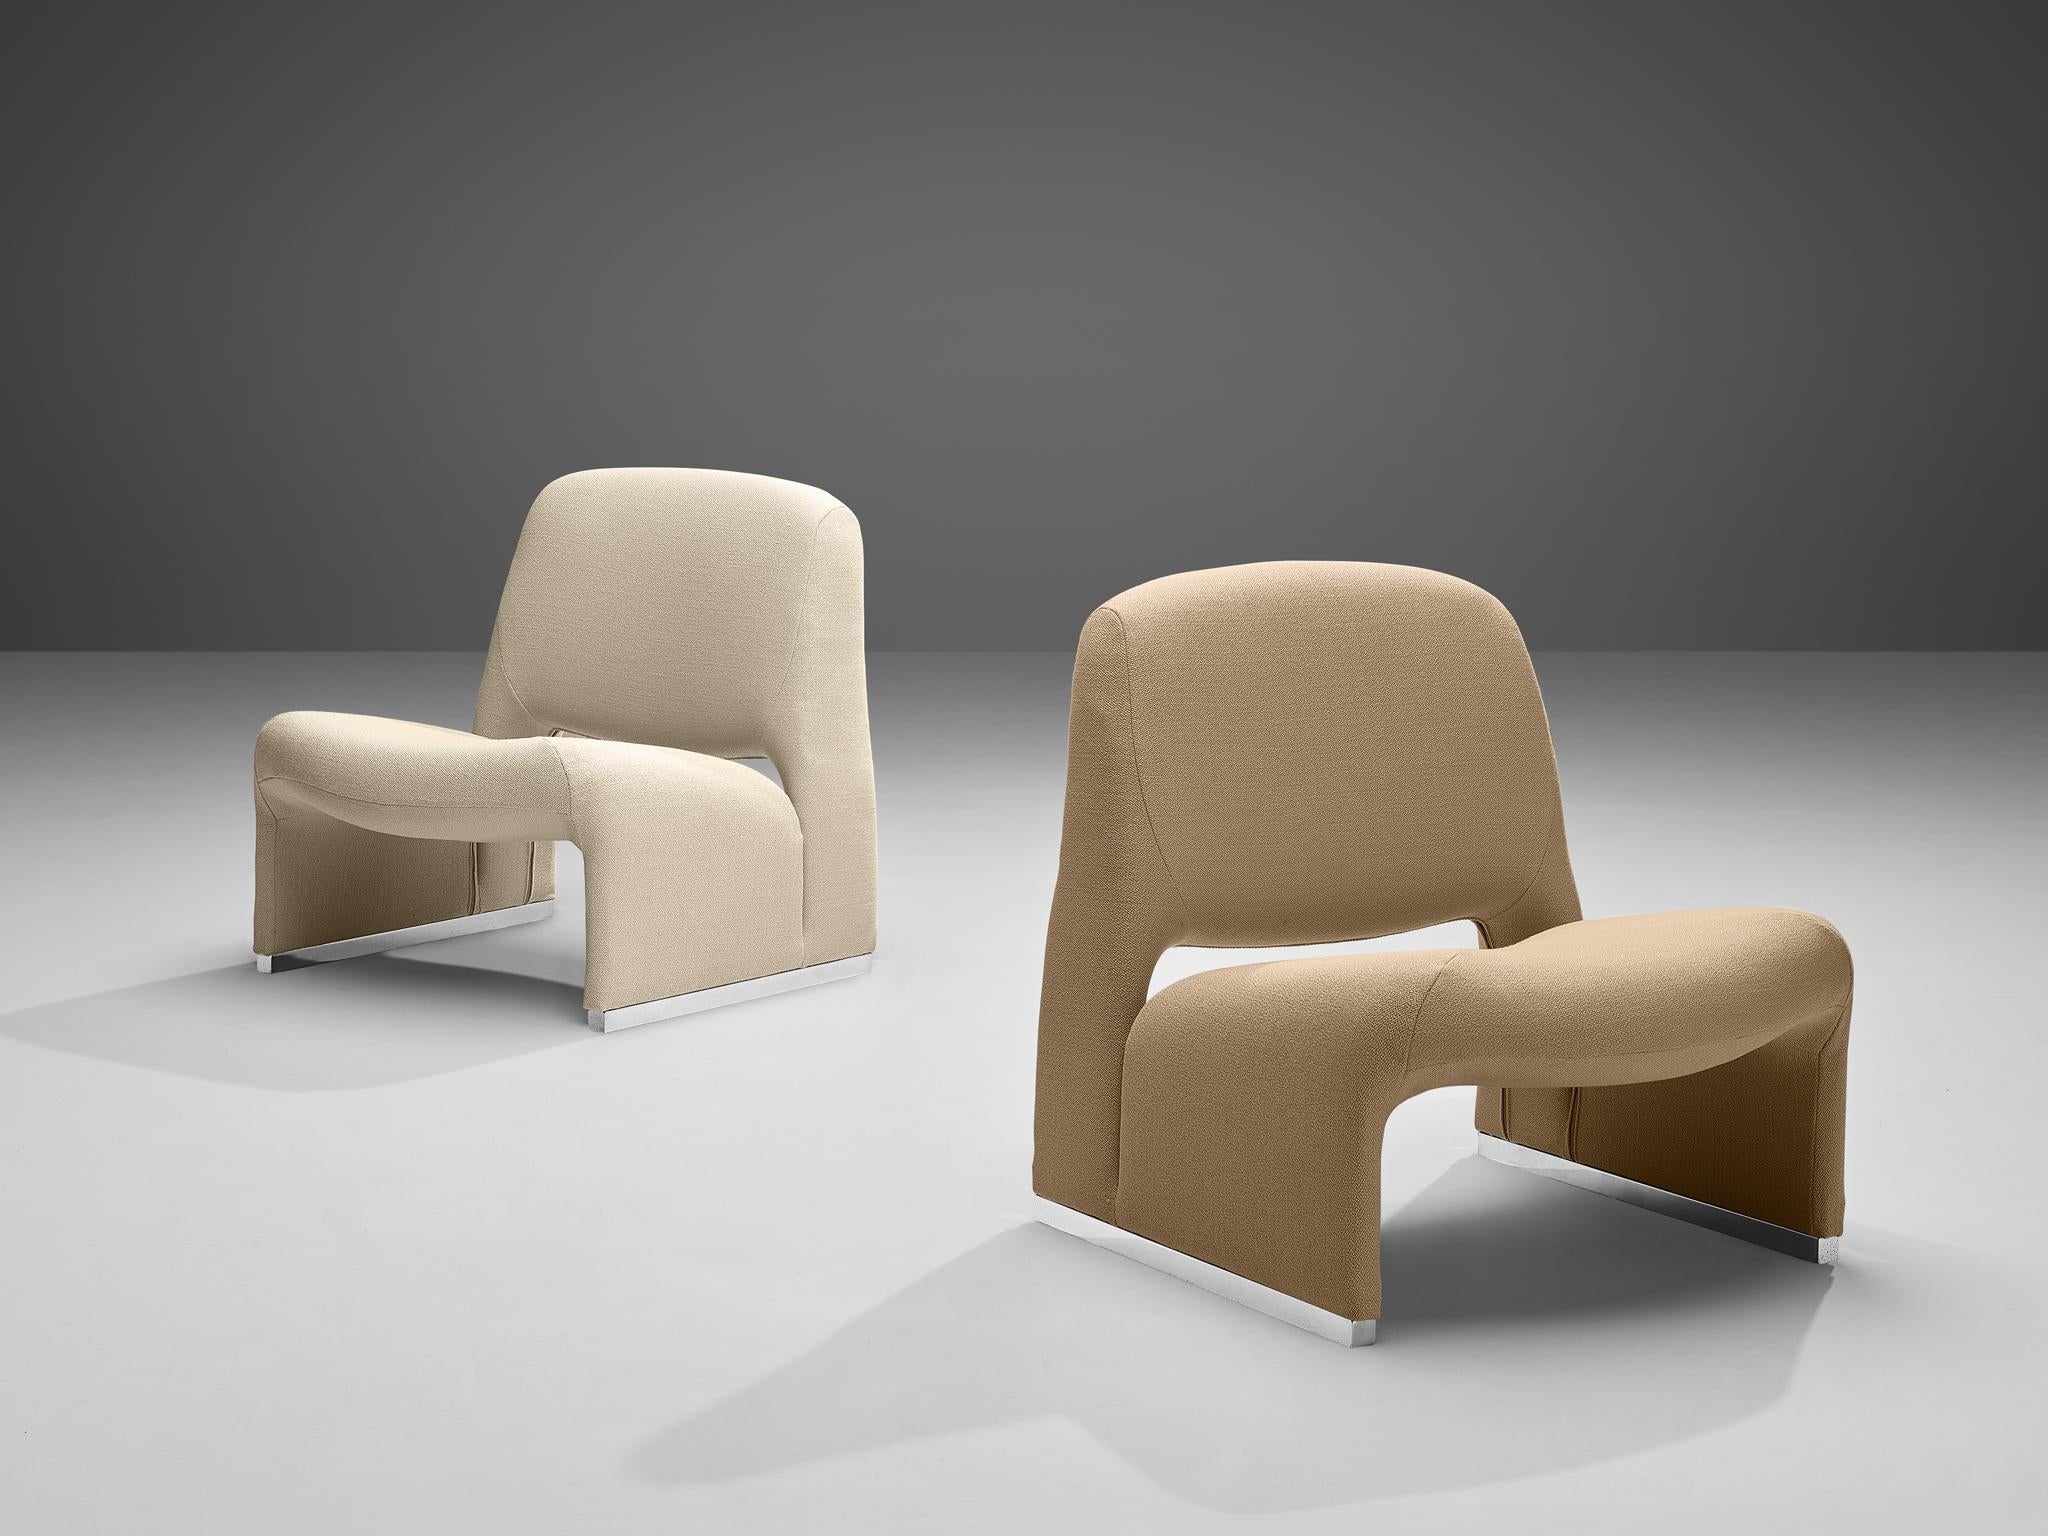 Giancarlo Piretti for Artifort, pair of bicolor 'Arki' lounge chairs, beige fabric upholstery, Italy, 1970s

The 'Alky' armchair designed by Giancarlo Piretti for Castelli in 1969. Later, Artifort took over the production of these chairs. The model